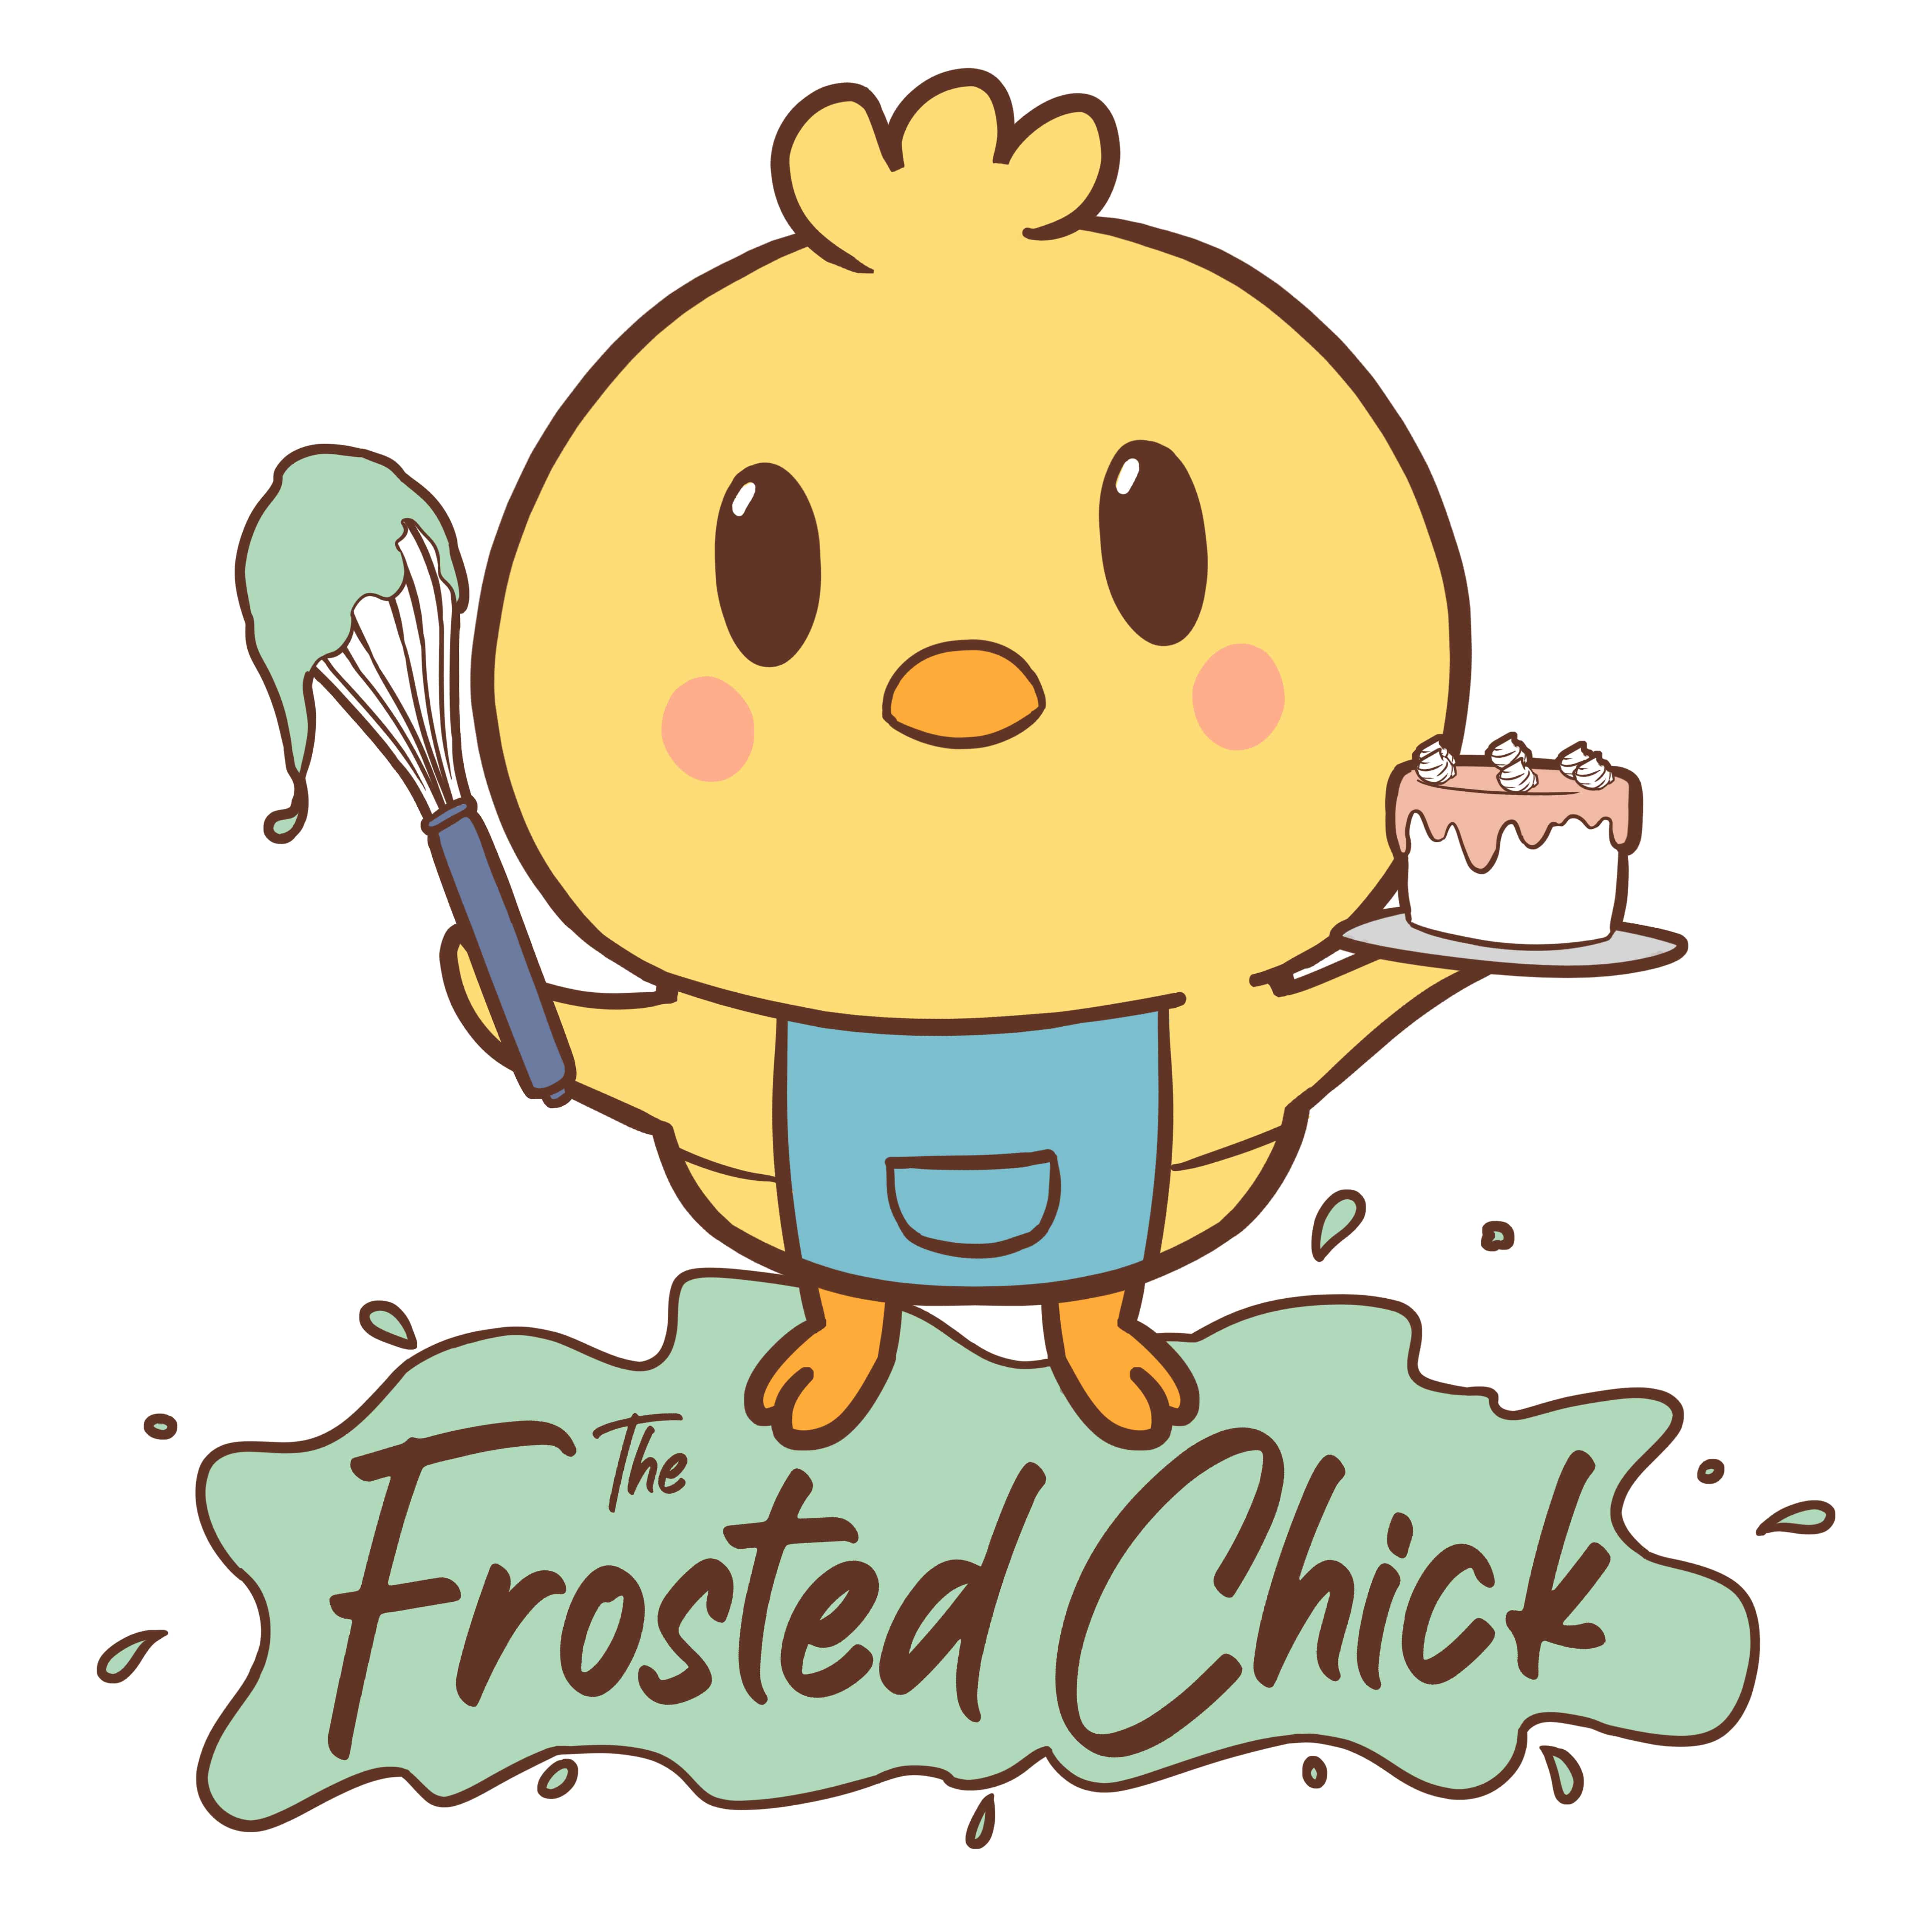 The Frosted Chick